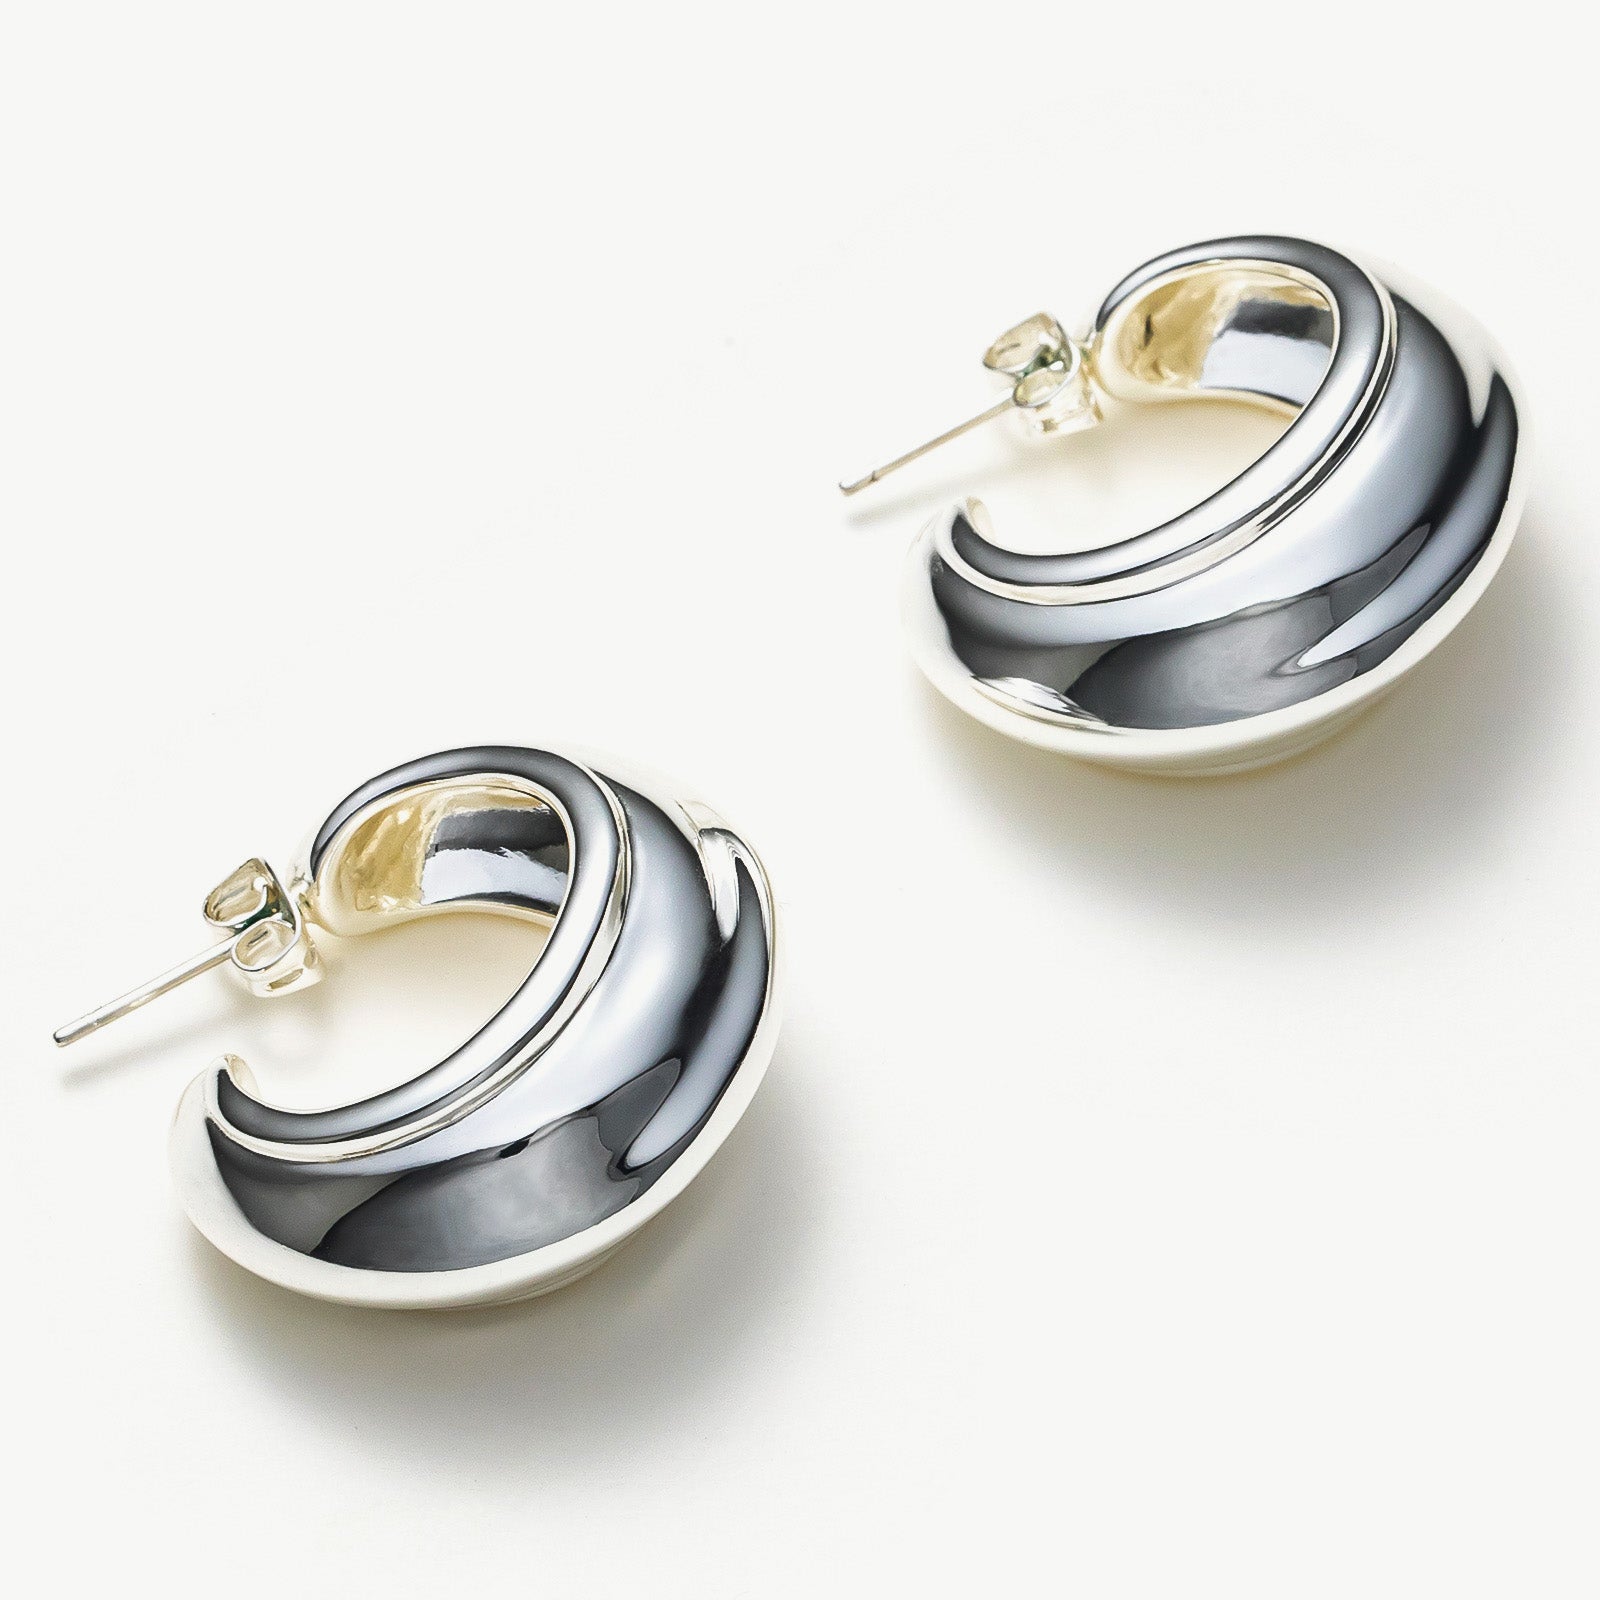 Ridge Hoop Earrings with a chic appeal, these hoops bring a touch of trendiness to your style, making them a fashionable and eye-catching choice for your jewelry collection.